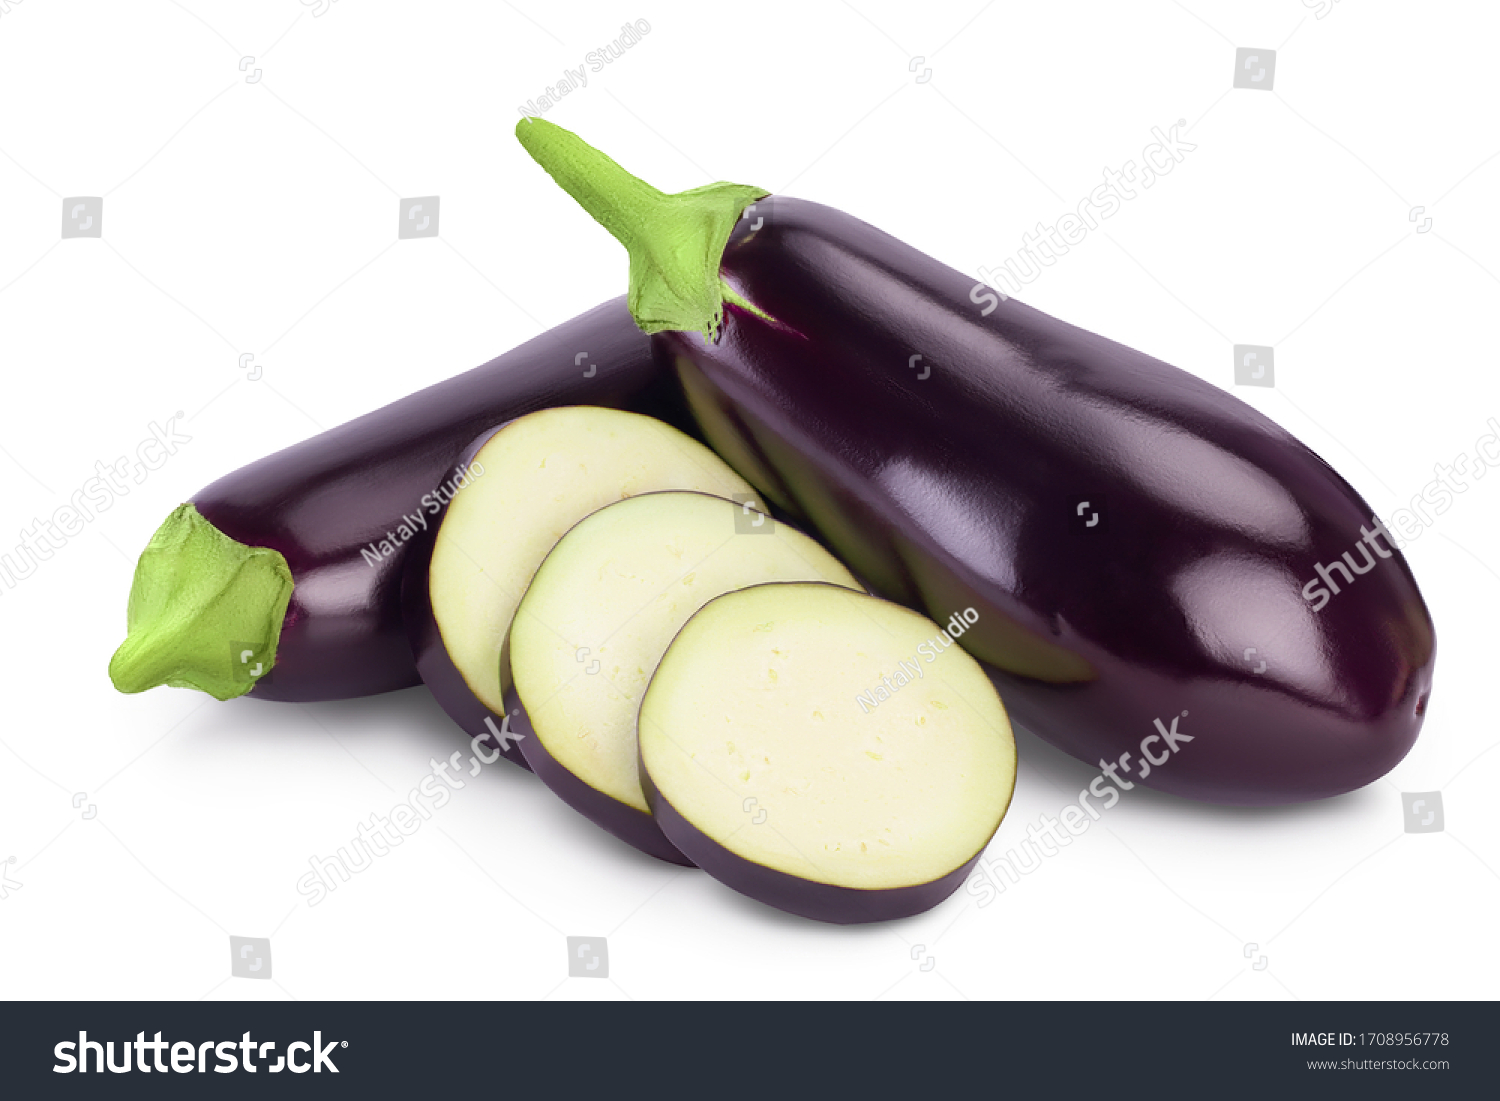 Eggplant or aubergine isolated on white background with clipping path and full depth of field #1708956778